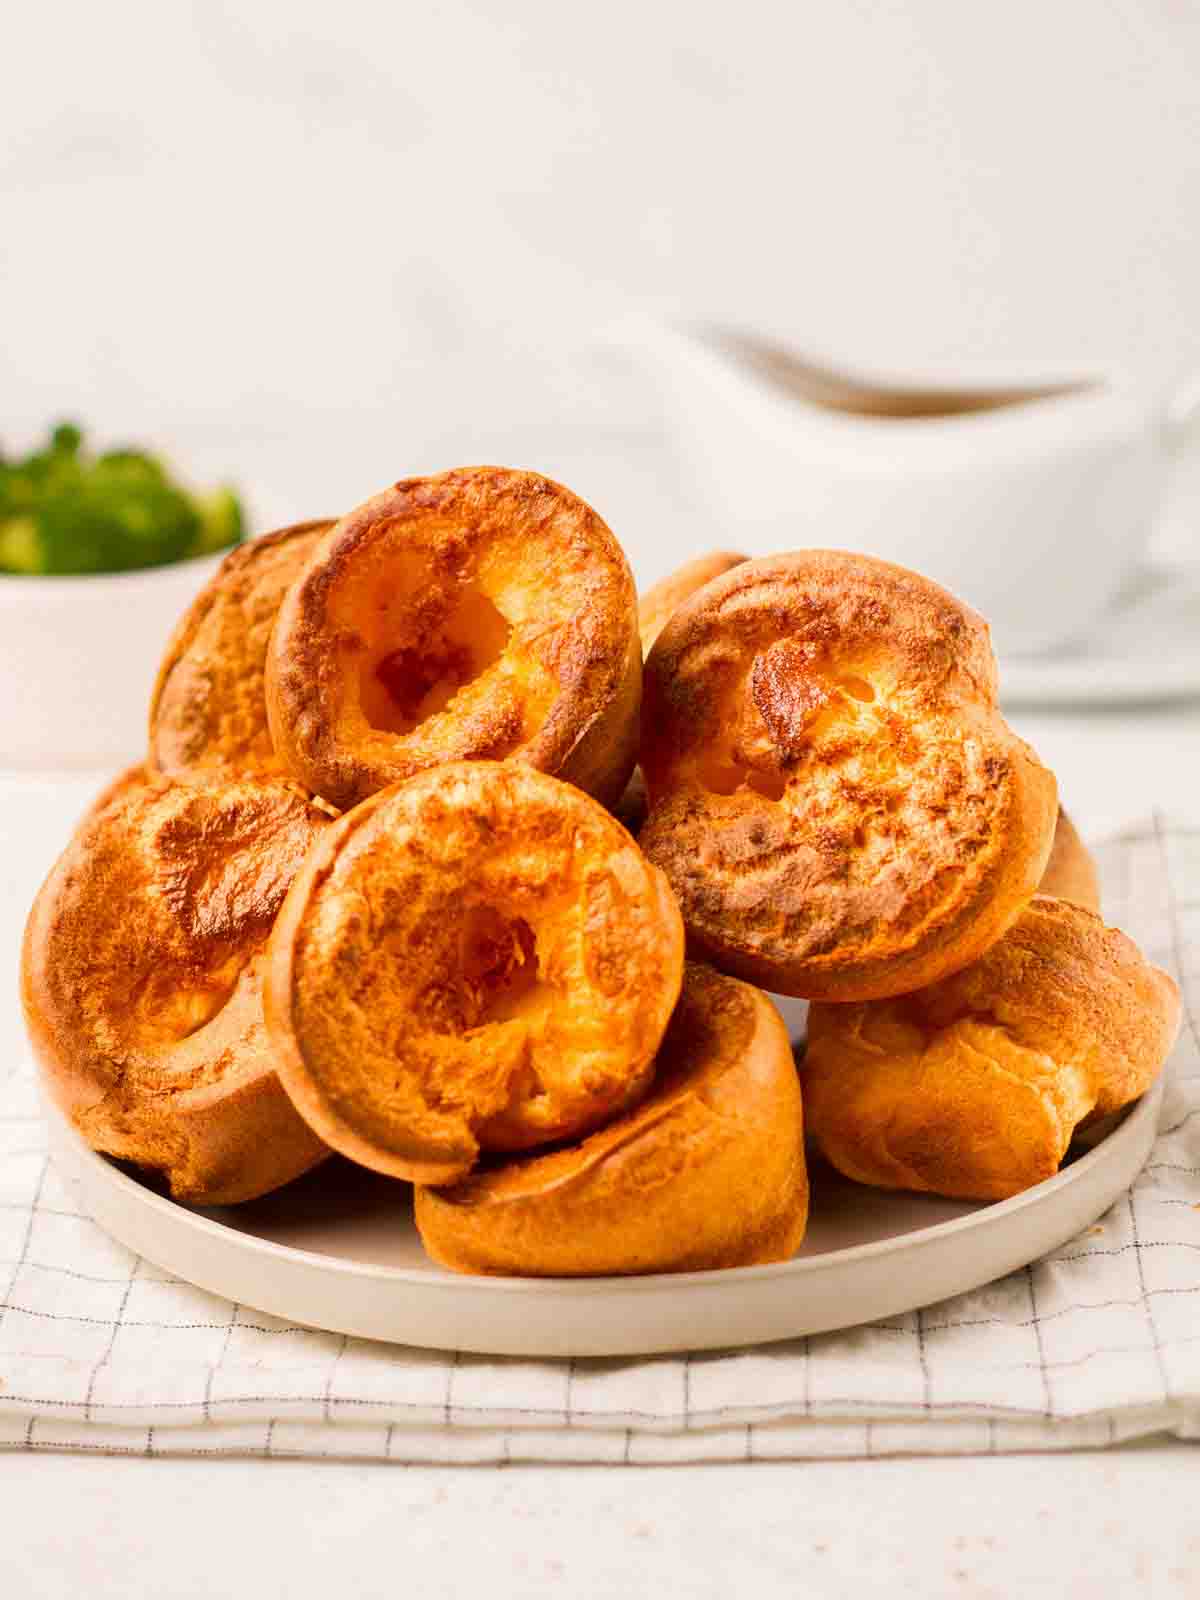 A plate filled with a pile of Yorkshire Puddings.